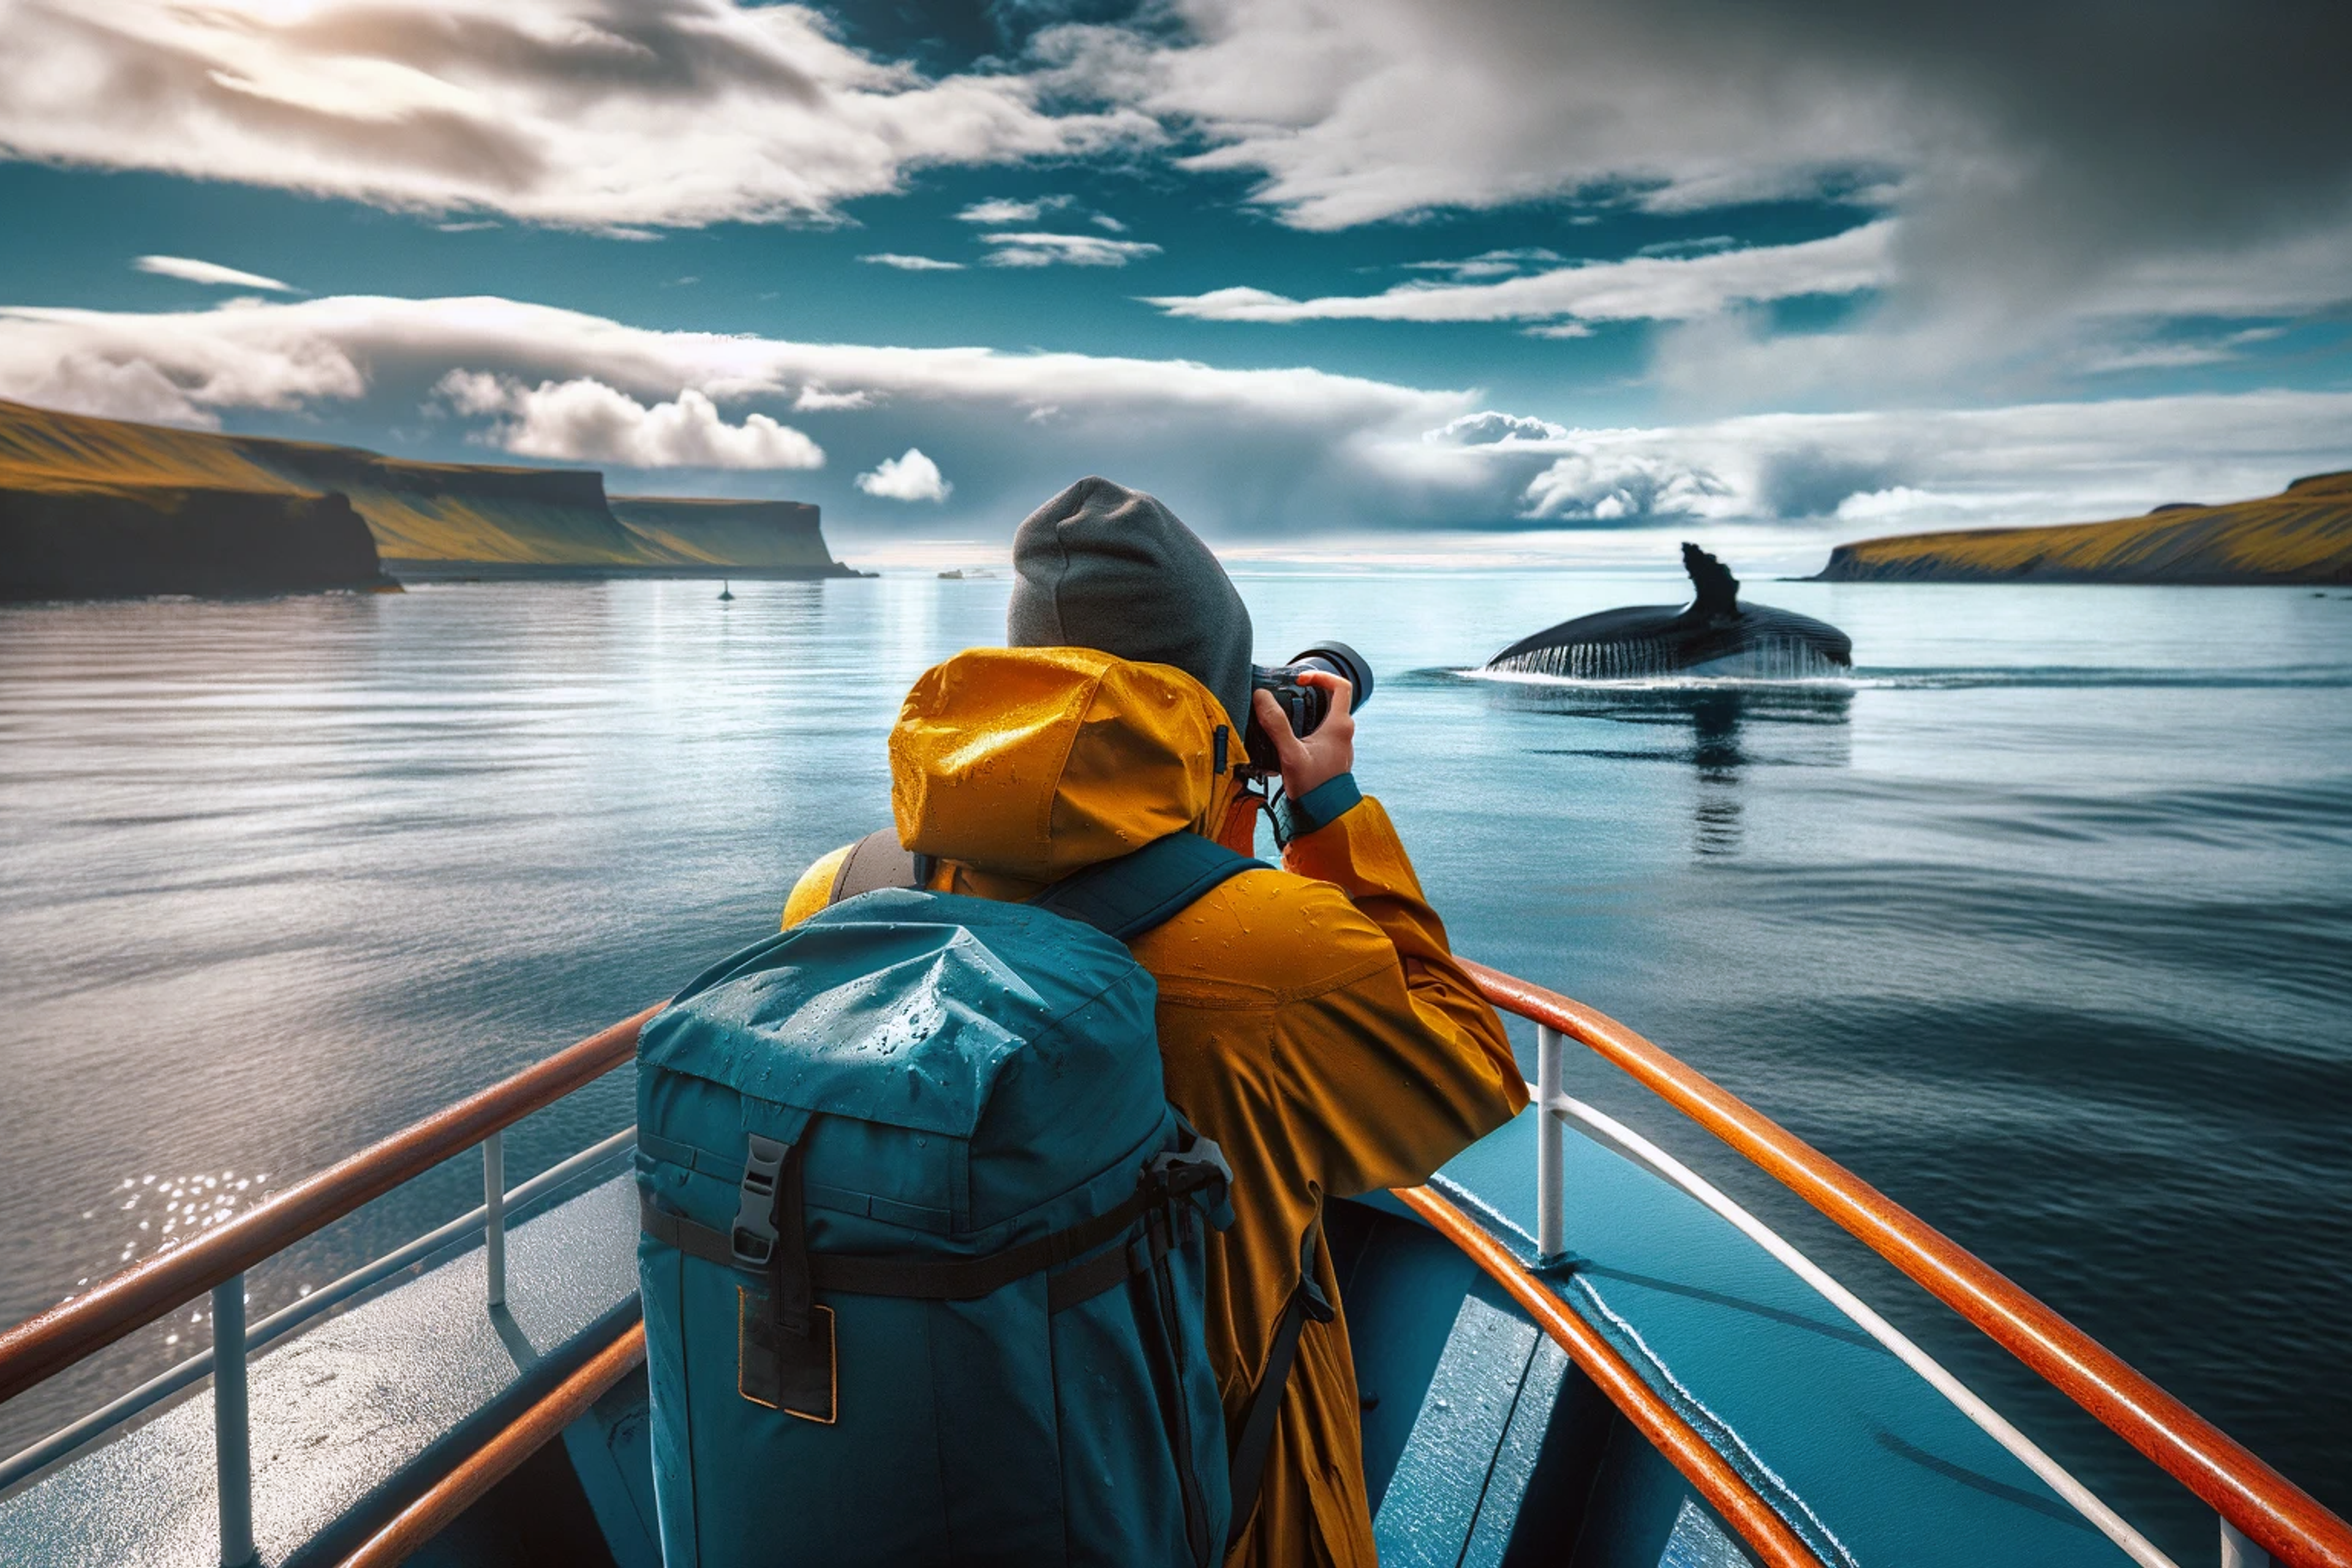 finding a sperm whales on a boat tour in the icelandic waters in a summer trip